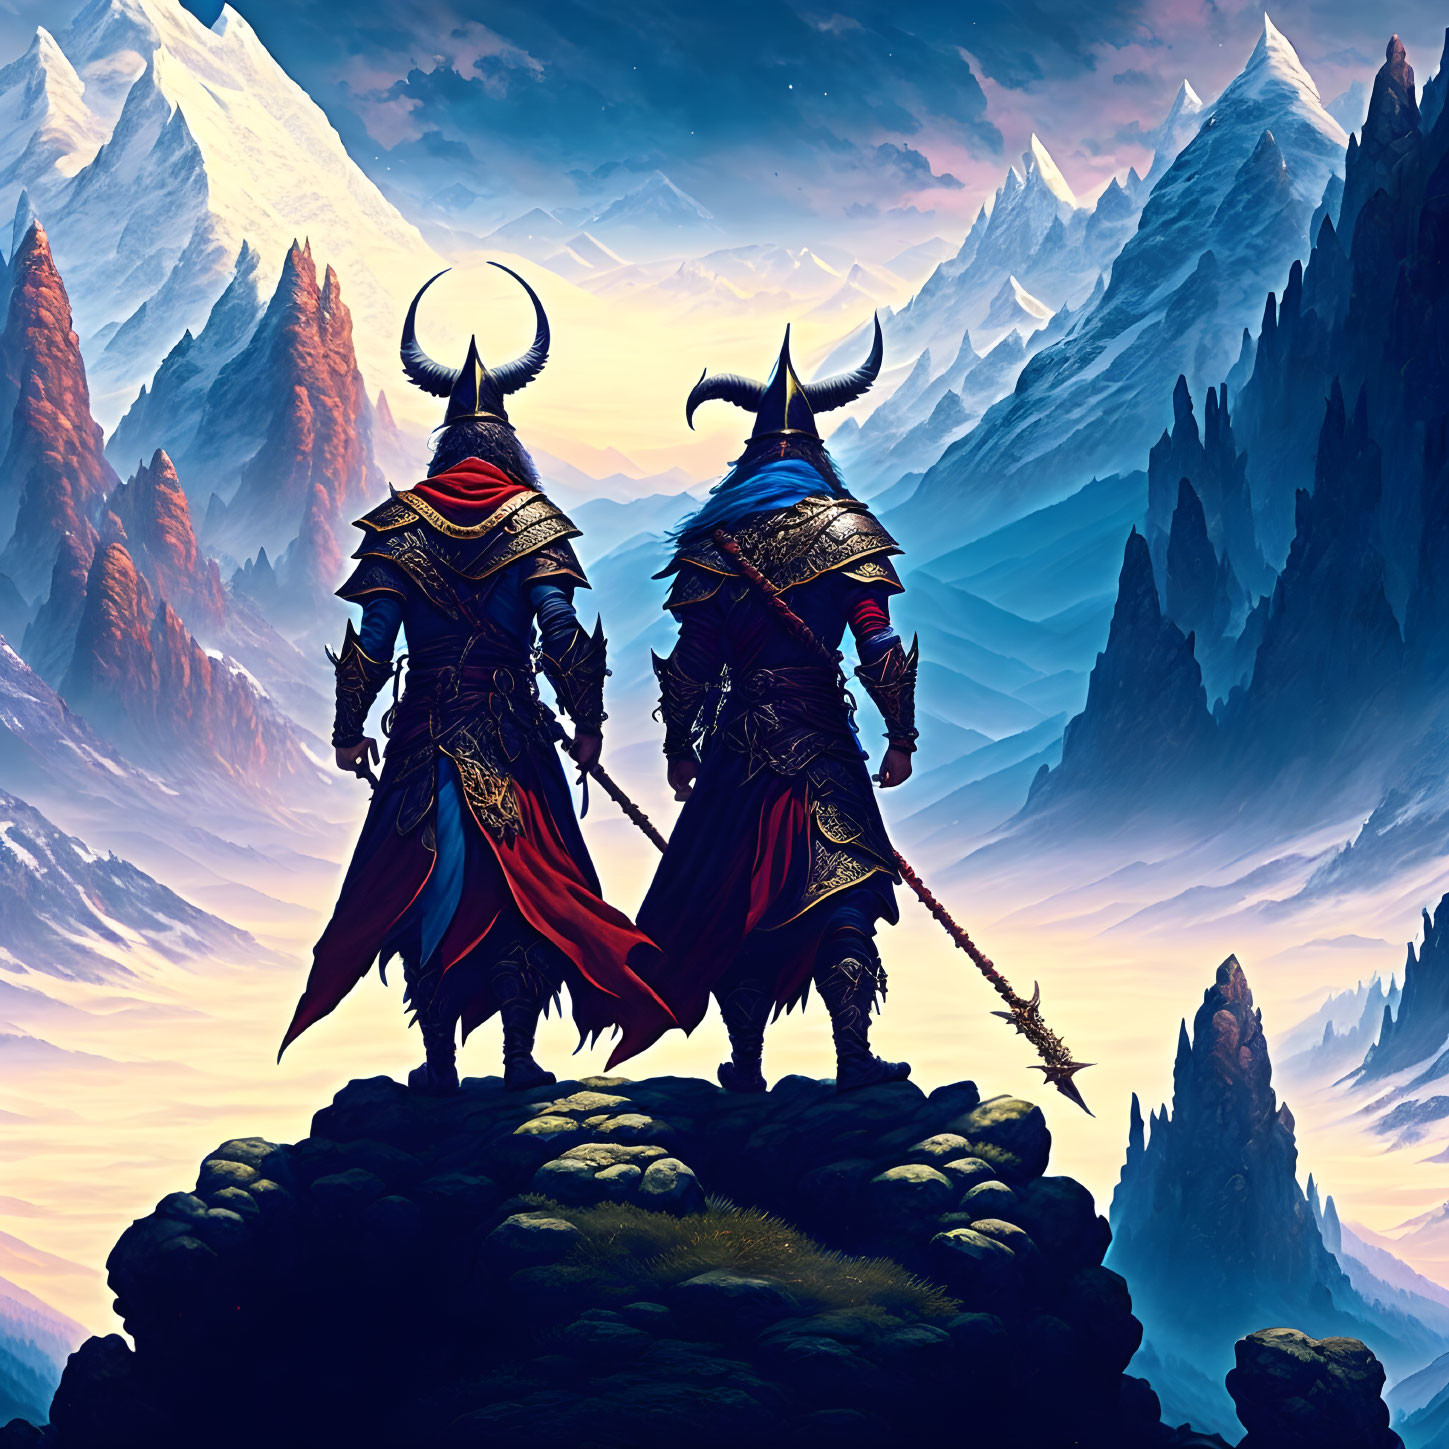 Armored fantasy characters with horns on cliff in dramatic landscape